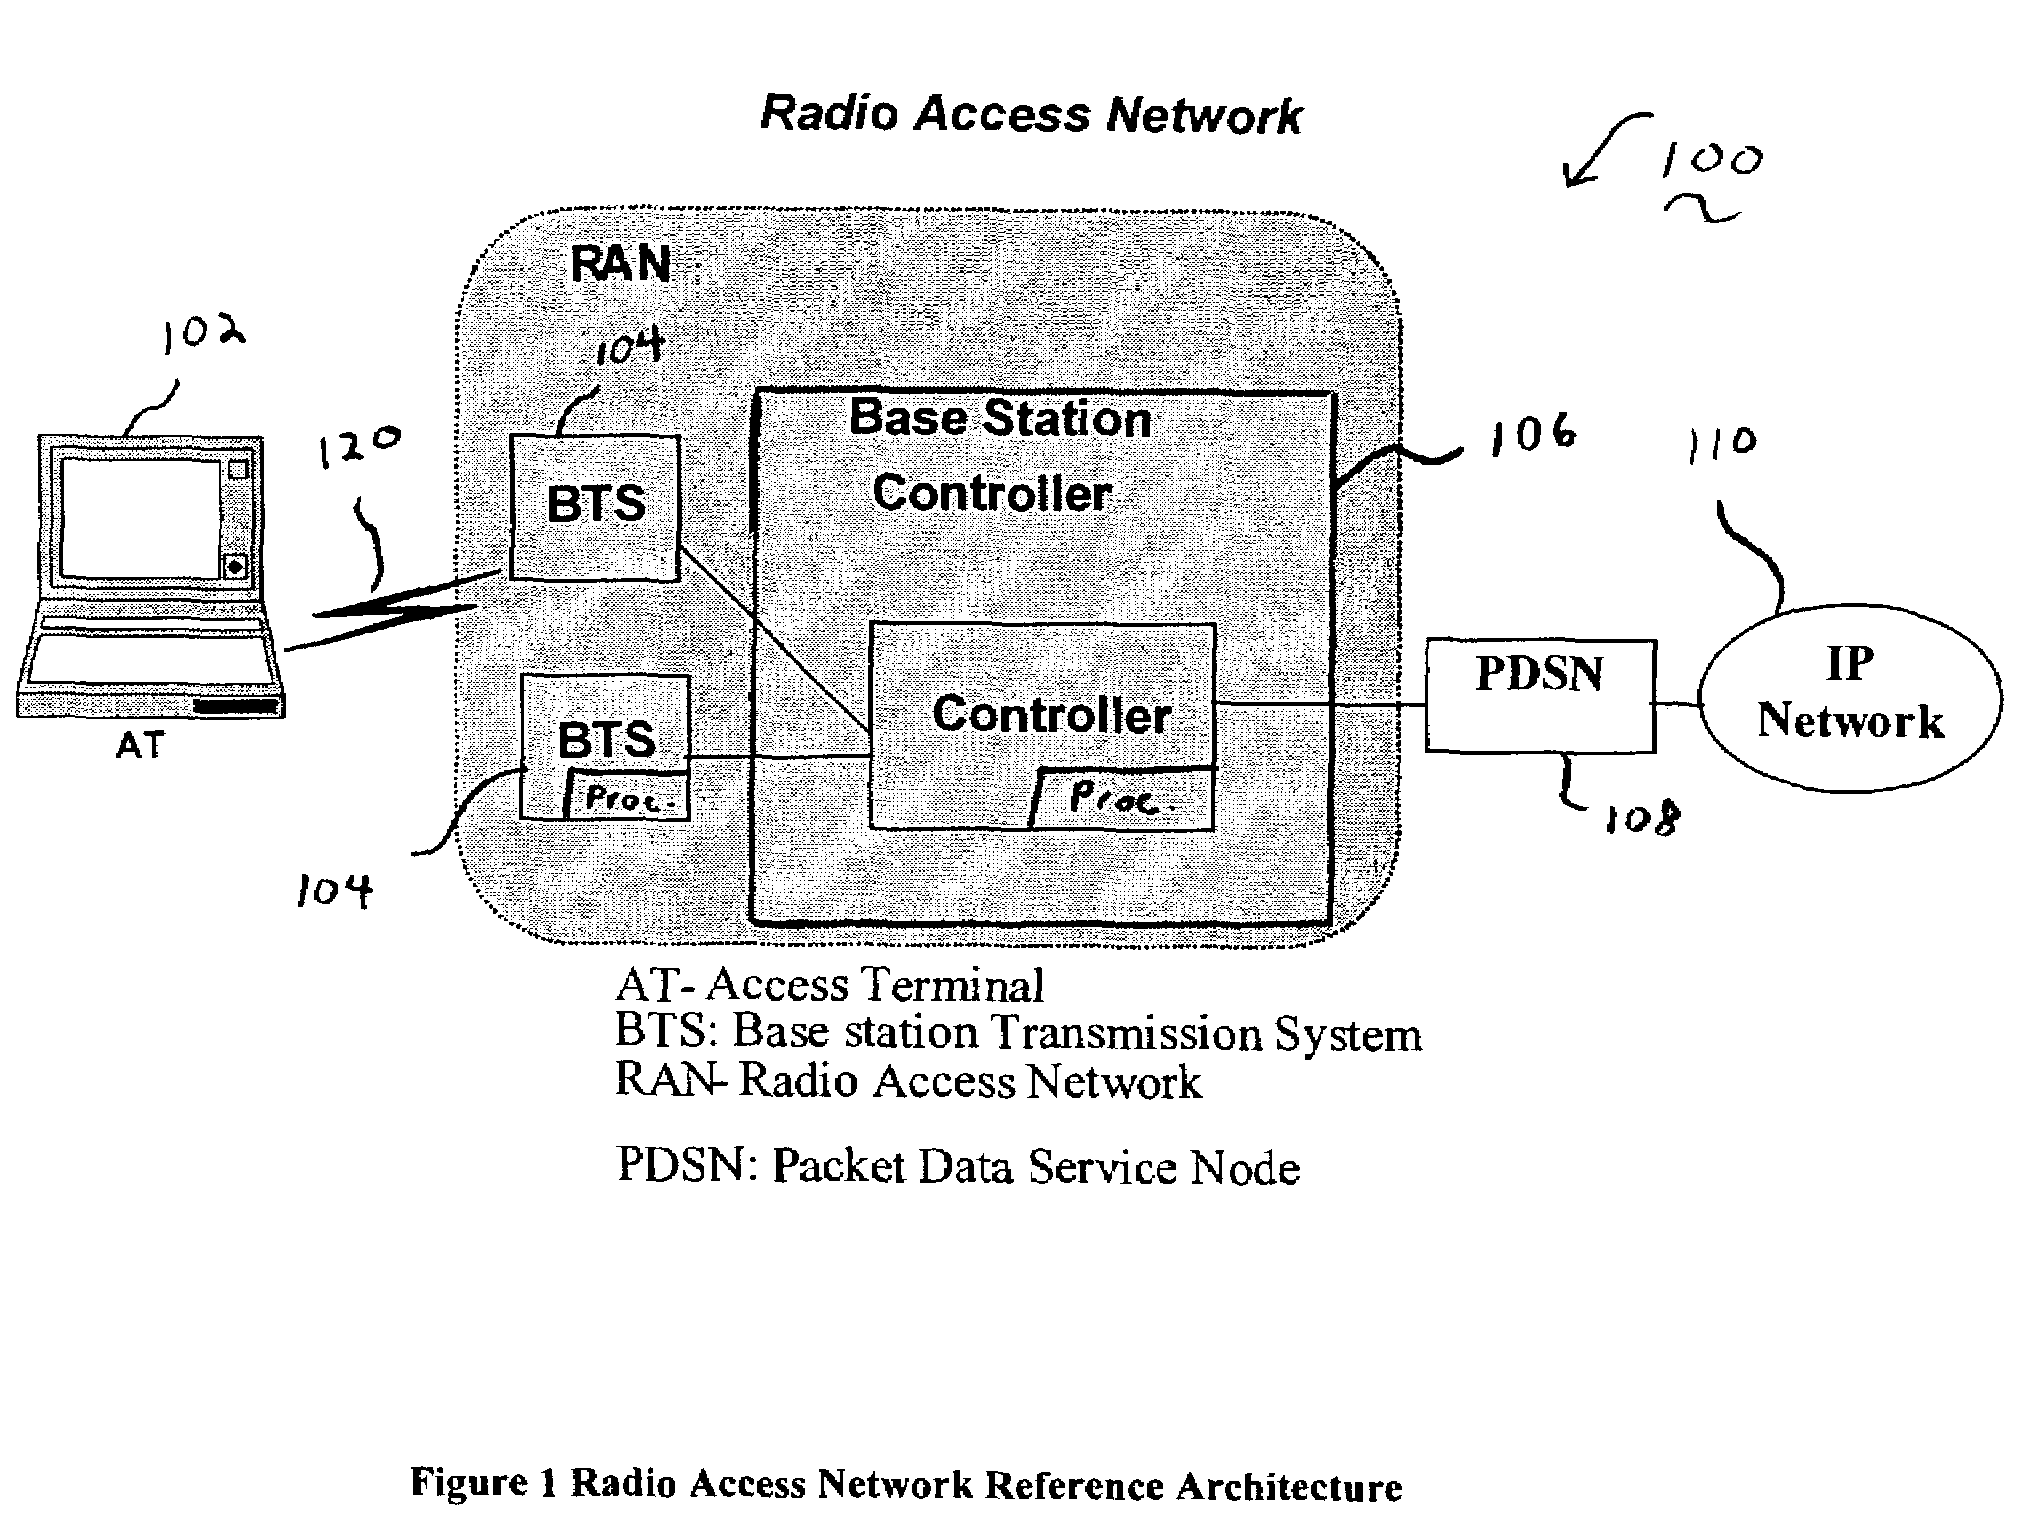 Methods and apparatus for optimum packet aggregation in a communication network